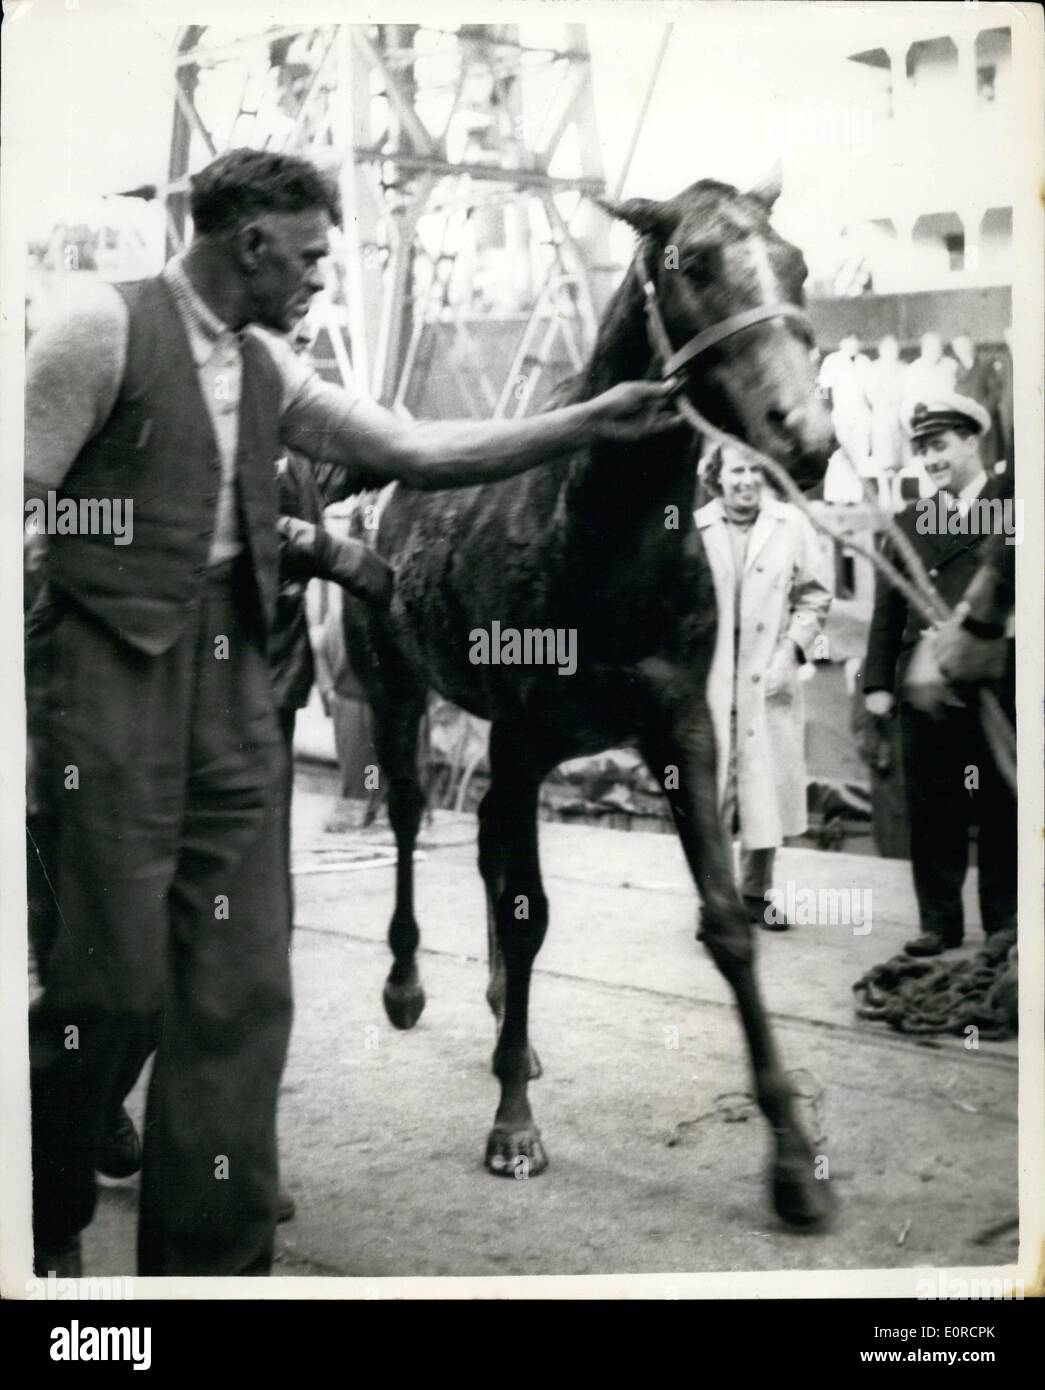 Dec. 12, 1958 - Thoroughbred racehorse takes a ducking. Accident while loading at London docks. ''Atonement'' a thoroughbred racehorse was beiin gowung a board the cargo liner ''Surat'' bound for Malaya today - when the cable enapped - and it plunged into the King George V Dock. Within a few minutes the two yer old geding was lifted out - and apart from a few grazes appeared to be none the worse of its ducking. The gelding was owned and trained by Mr. Peter Thrale at Epsom. The animal was sent back to its stables in middlesex - and will be shipped again later Stock Photo